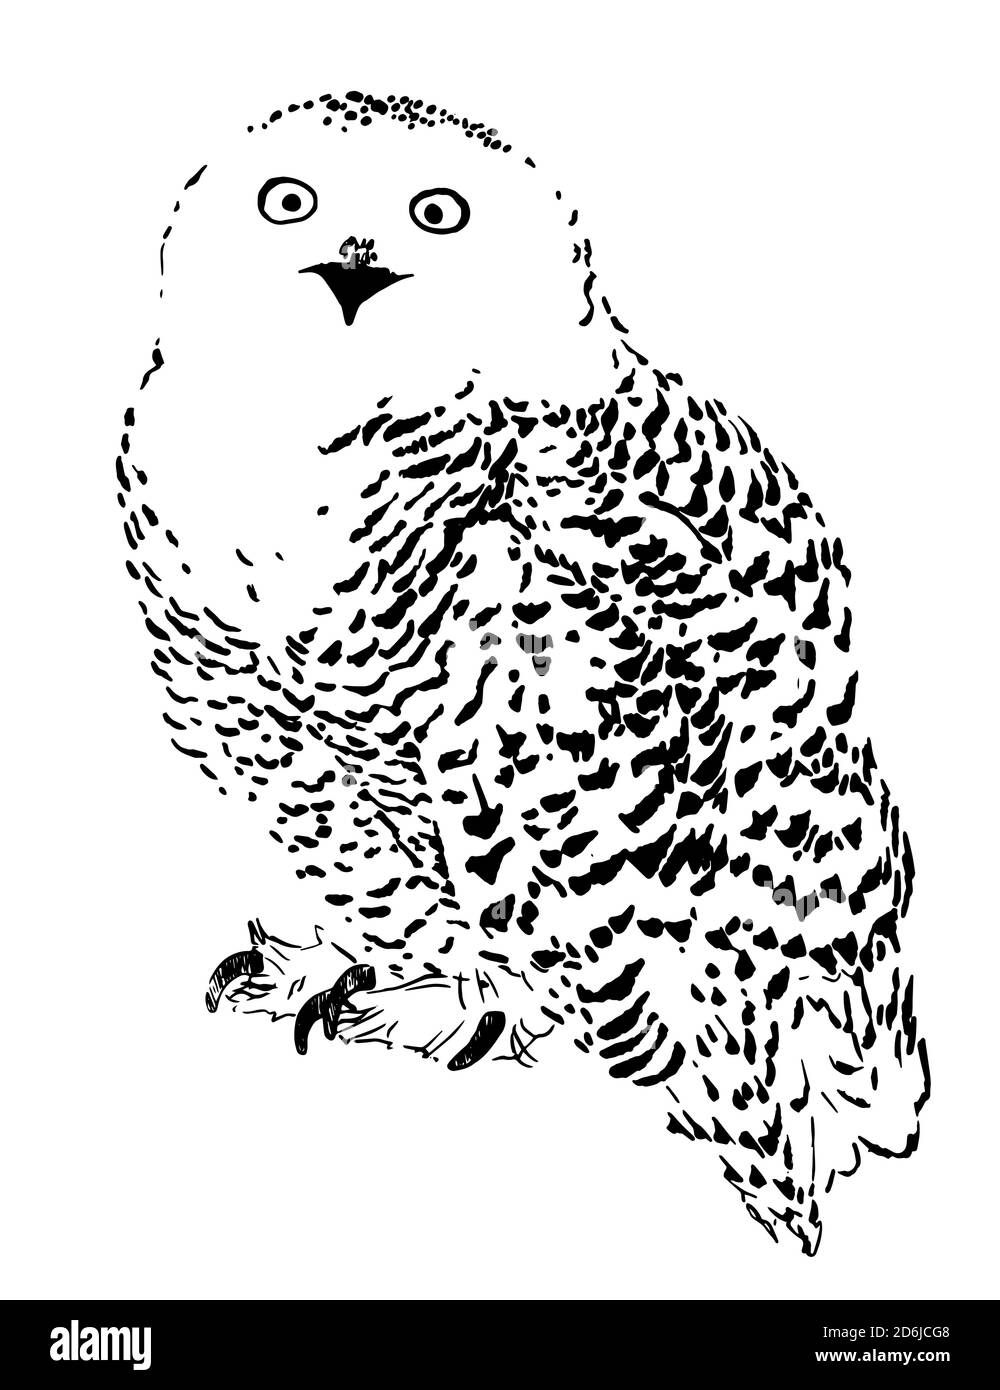 Polar owl sketch, Realistic vector illustration engraving style Hand drawn isolate on white background Stock Vector